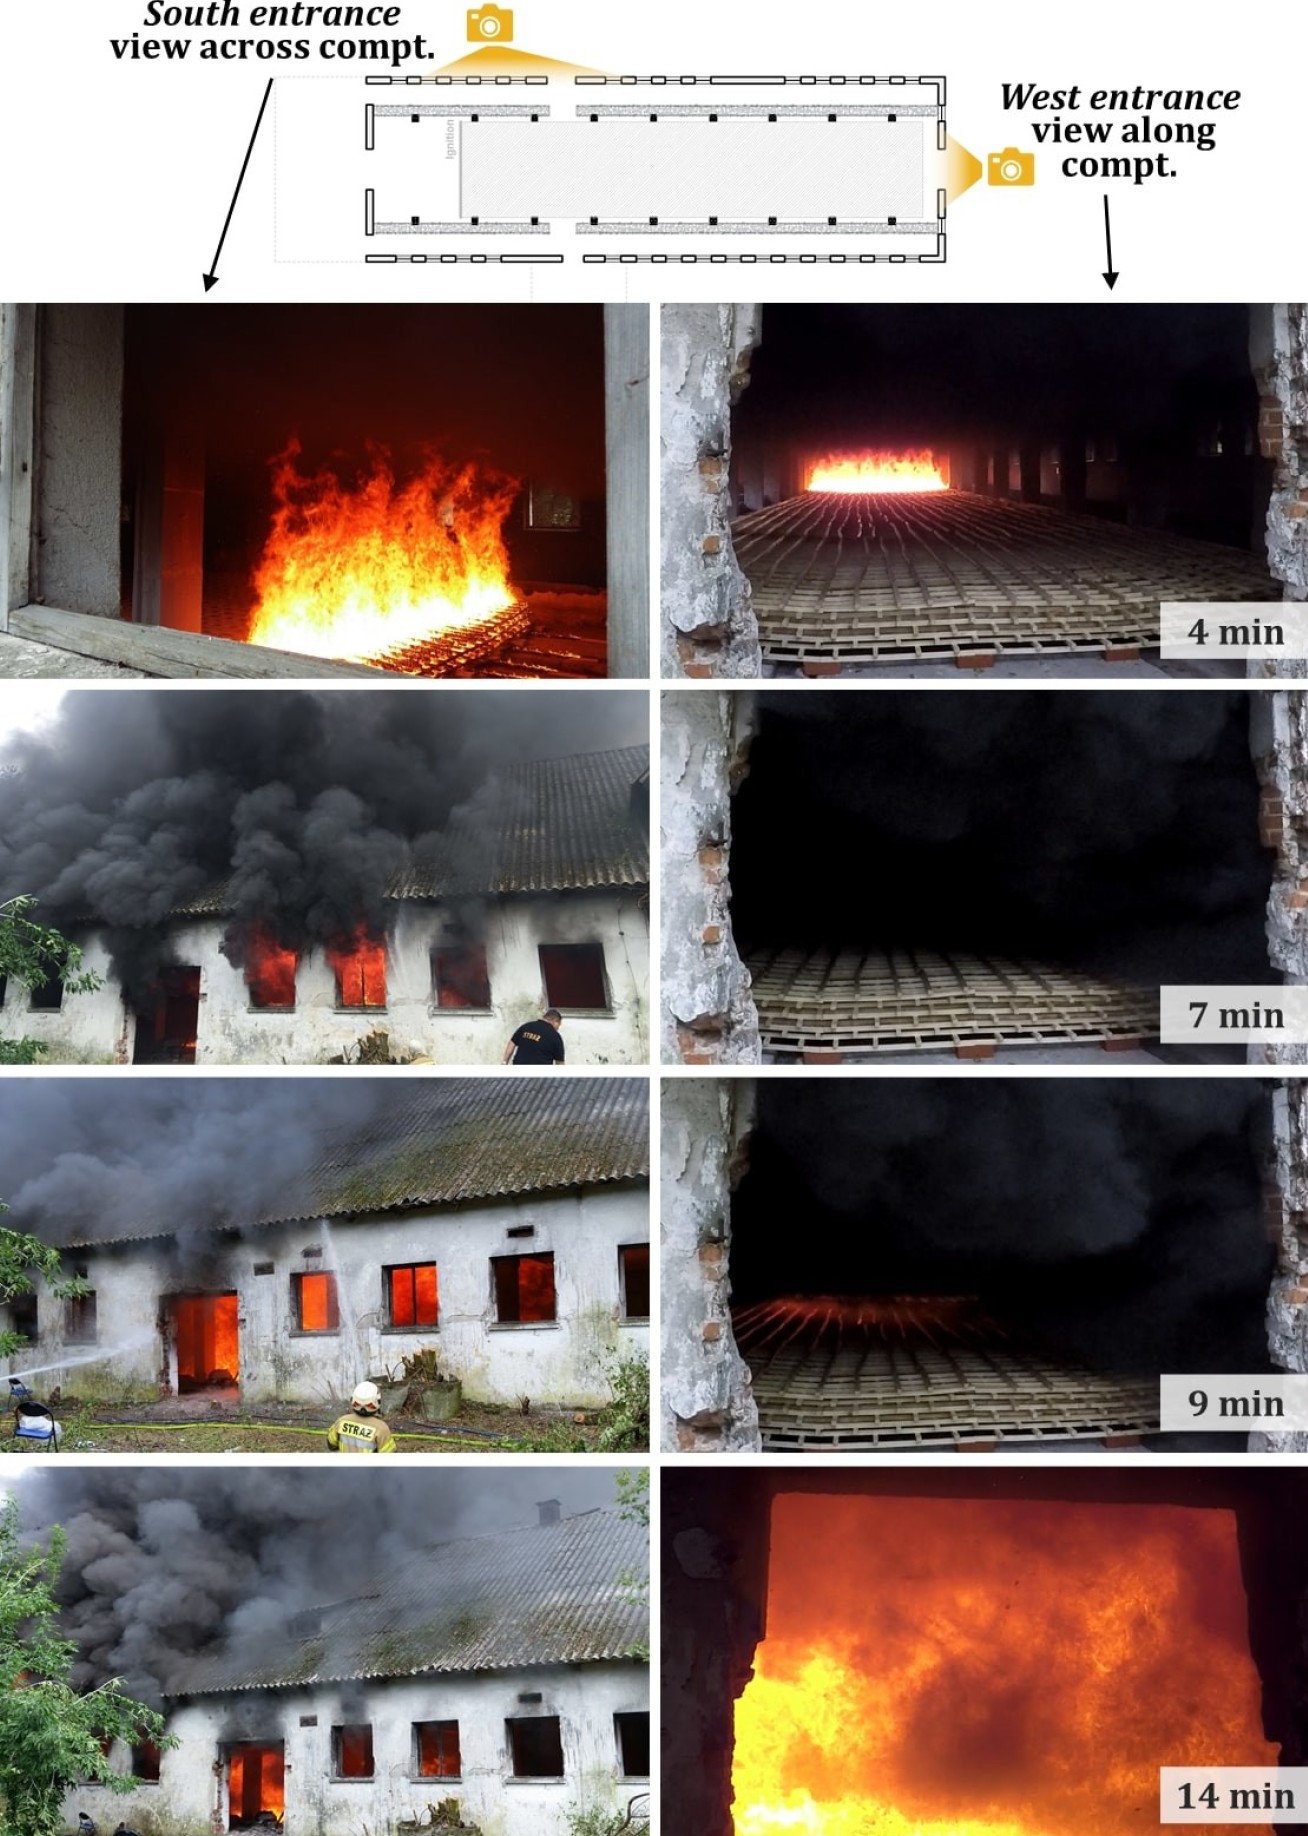 Images showing development of the fire over time